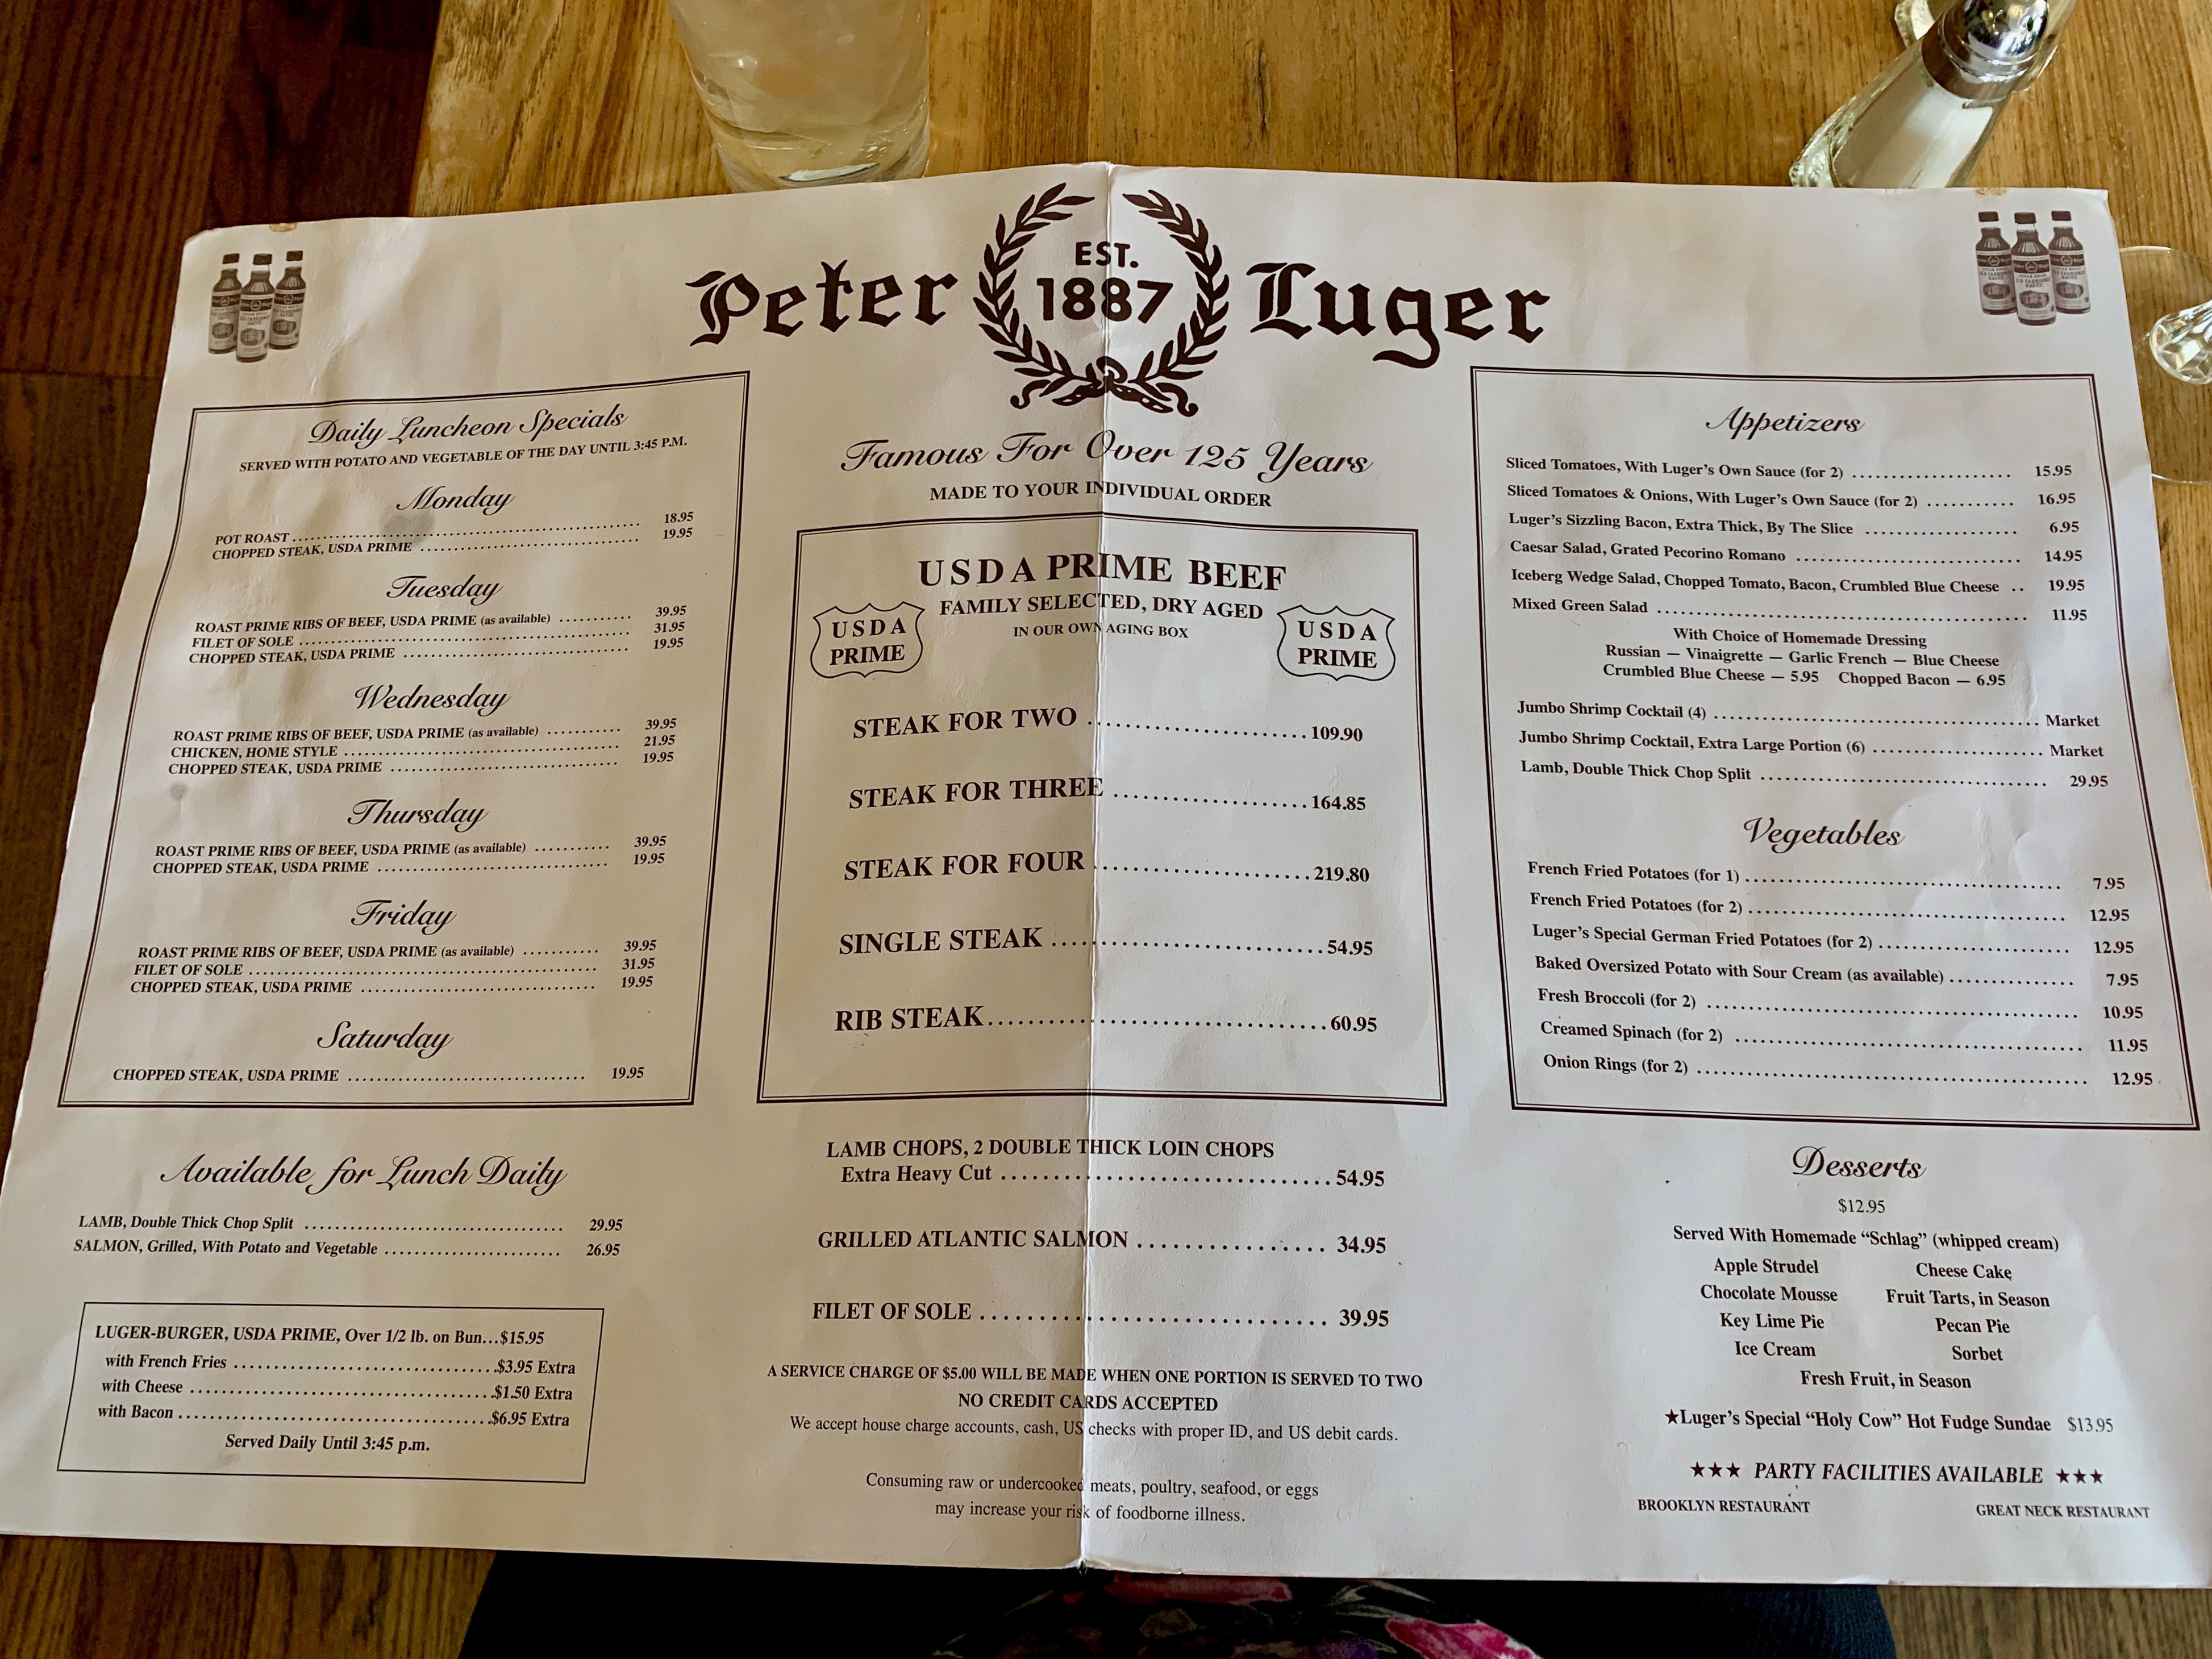 RESTAURANT REVIEW: Peter Luger Steak House, Brooklyn, NY - Your Mileage